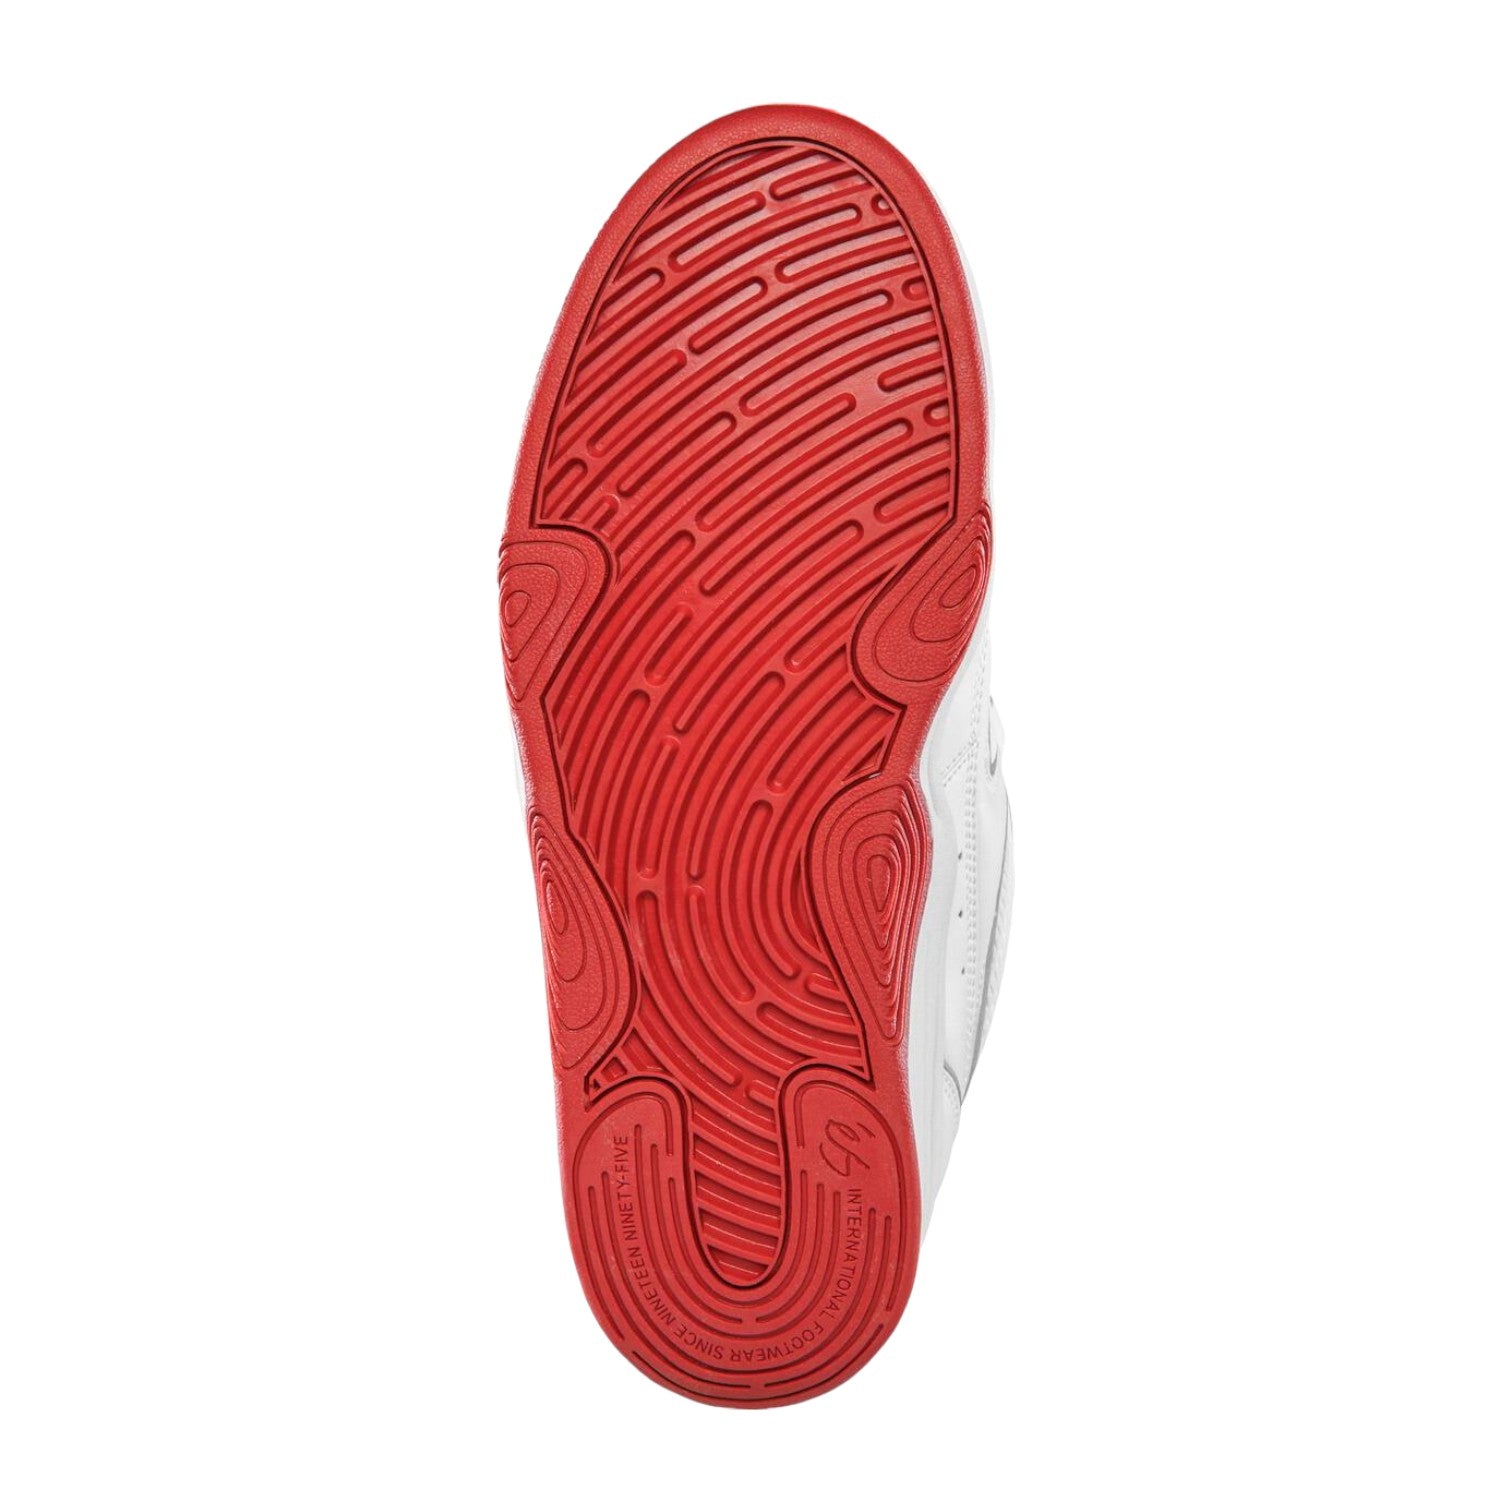 ES Two Nine 8 Skateboard Shoes - White/Red